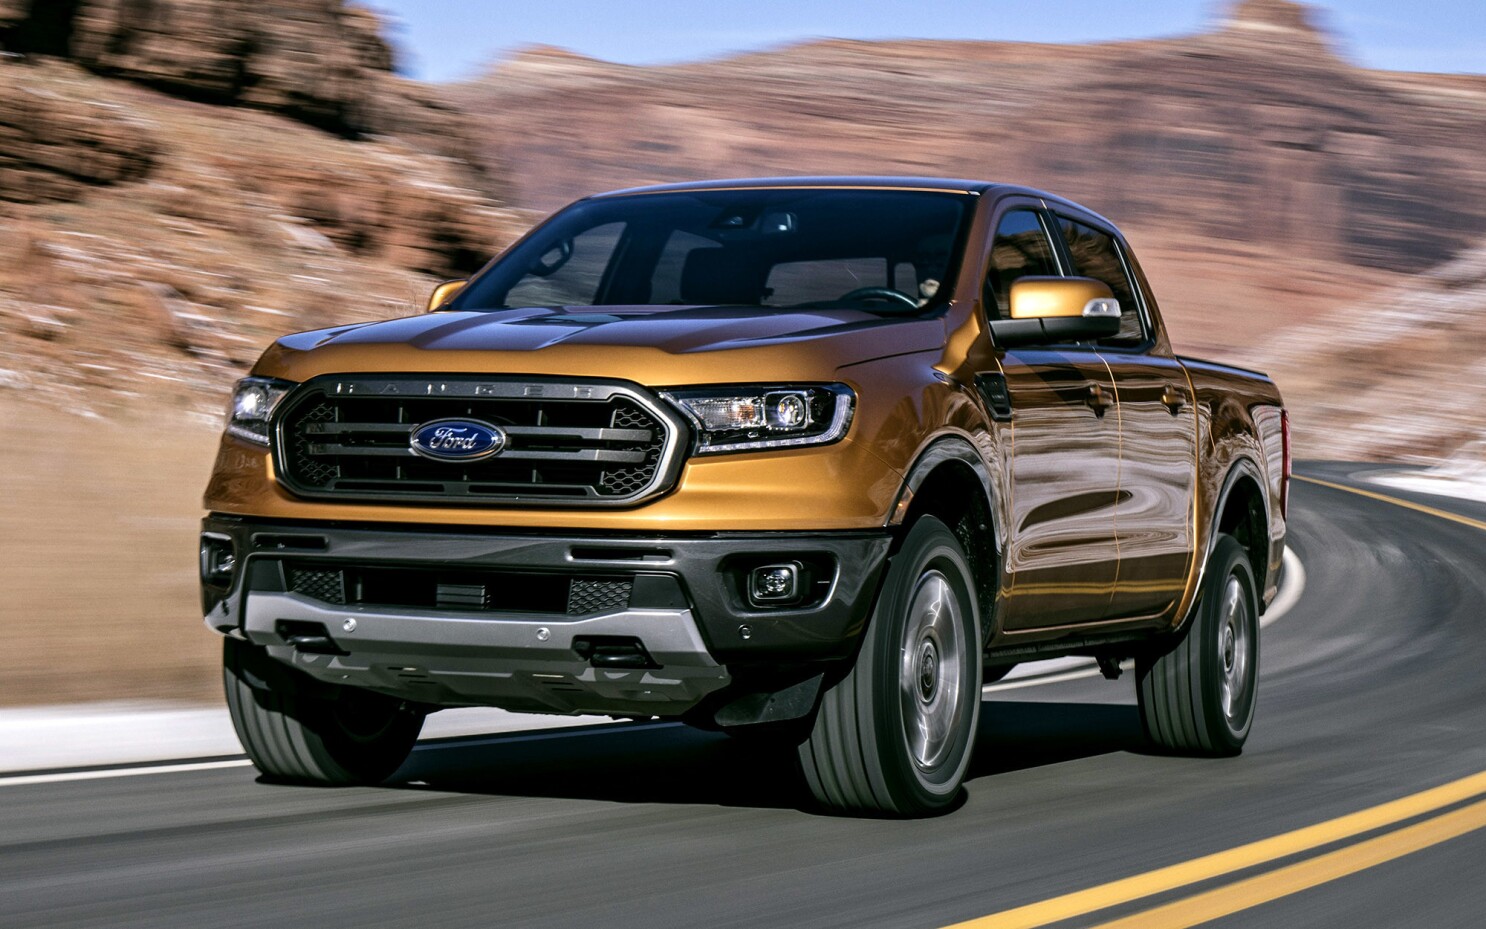 Ford sees a for a new Ranger as pickup truck soar $50,000 - Los Angeles